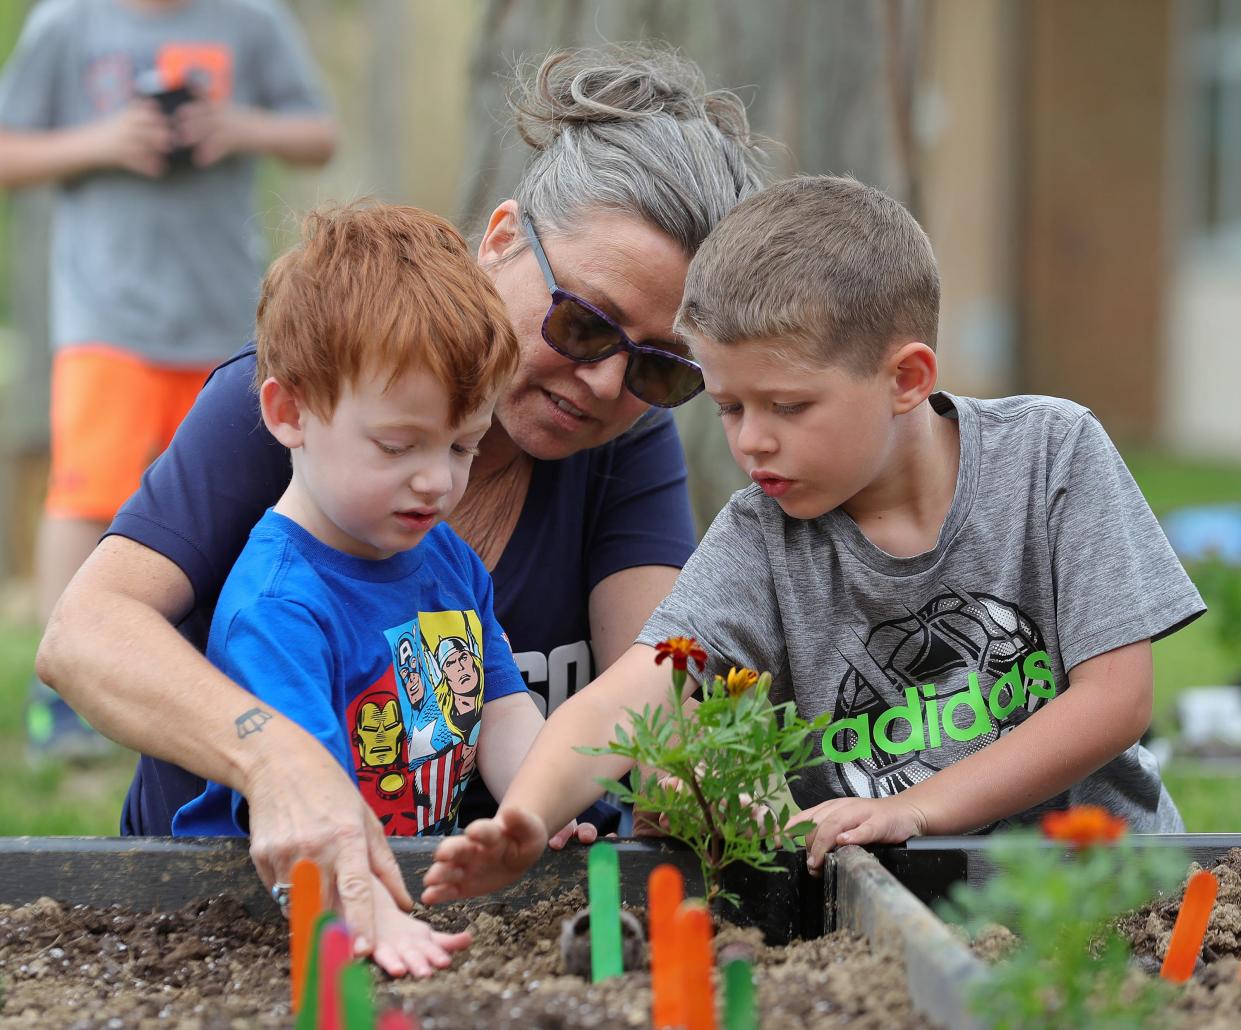 McDowell Early Learning School students Steven Weiss, left, and Connor Hartman, right, get help from aide Rena Tyrrell planting marigolds in the school’s sensory garden in Hudson.